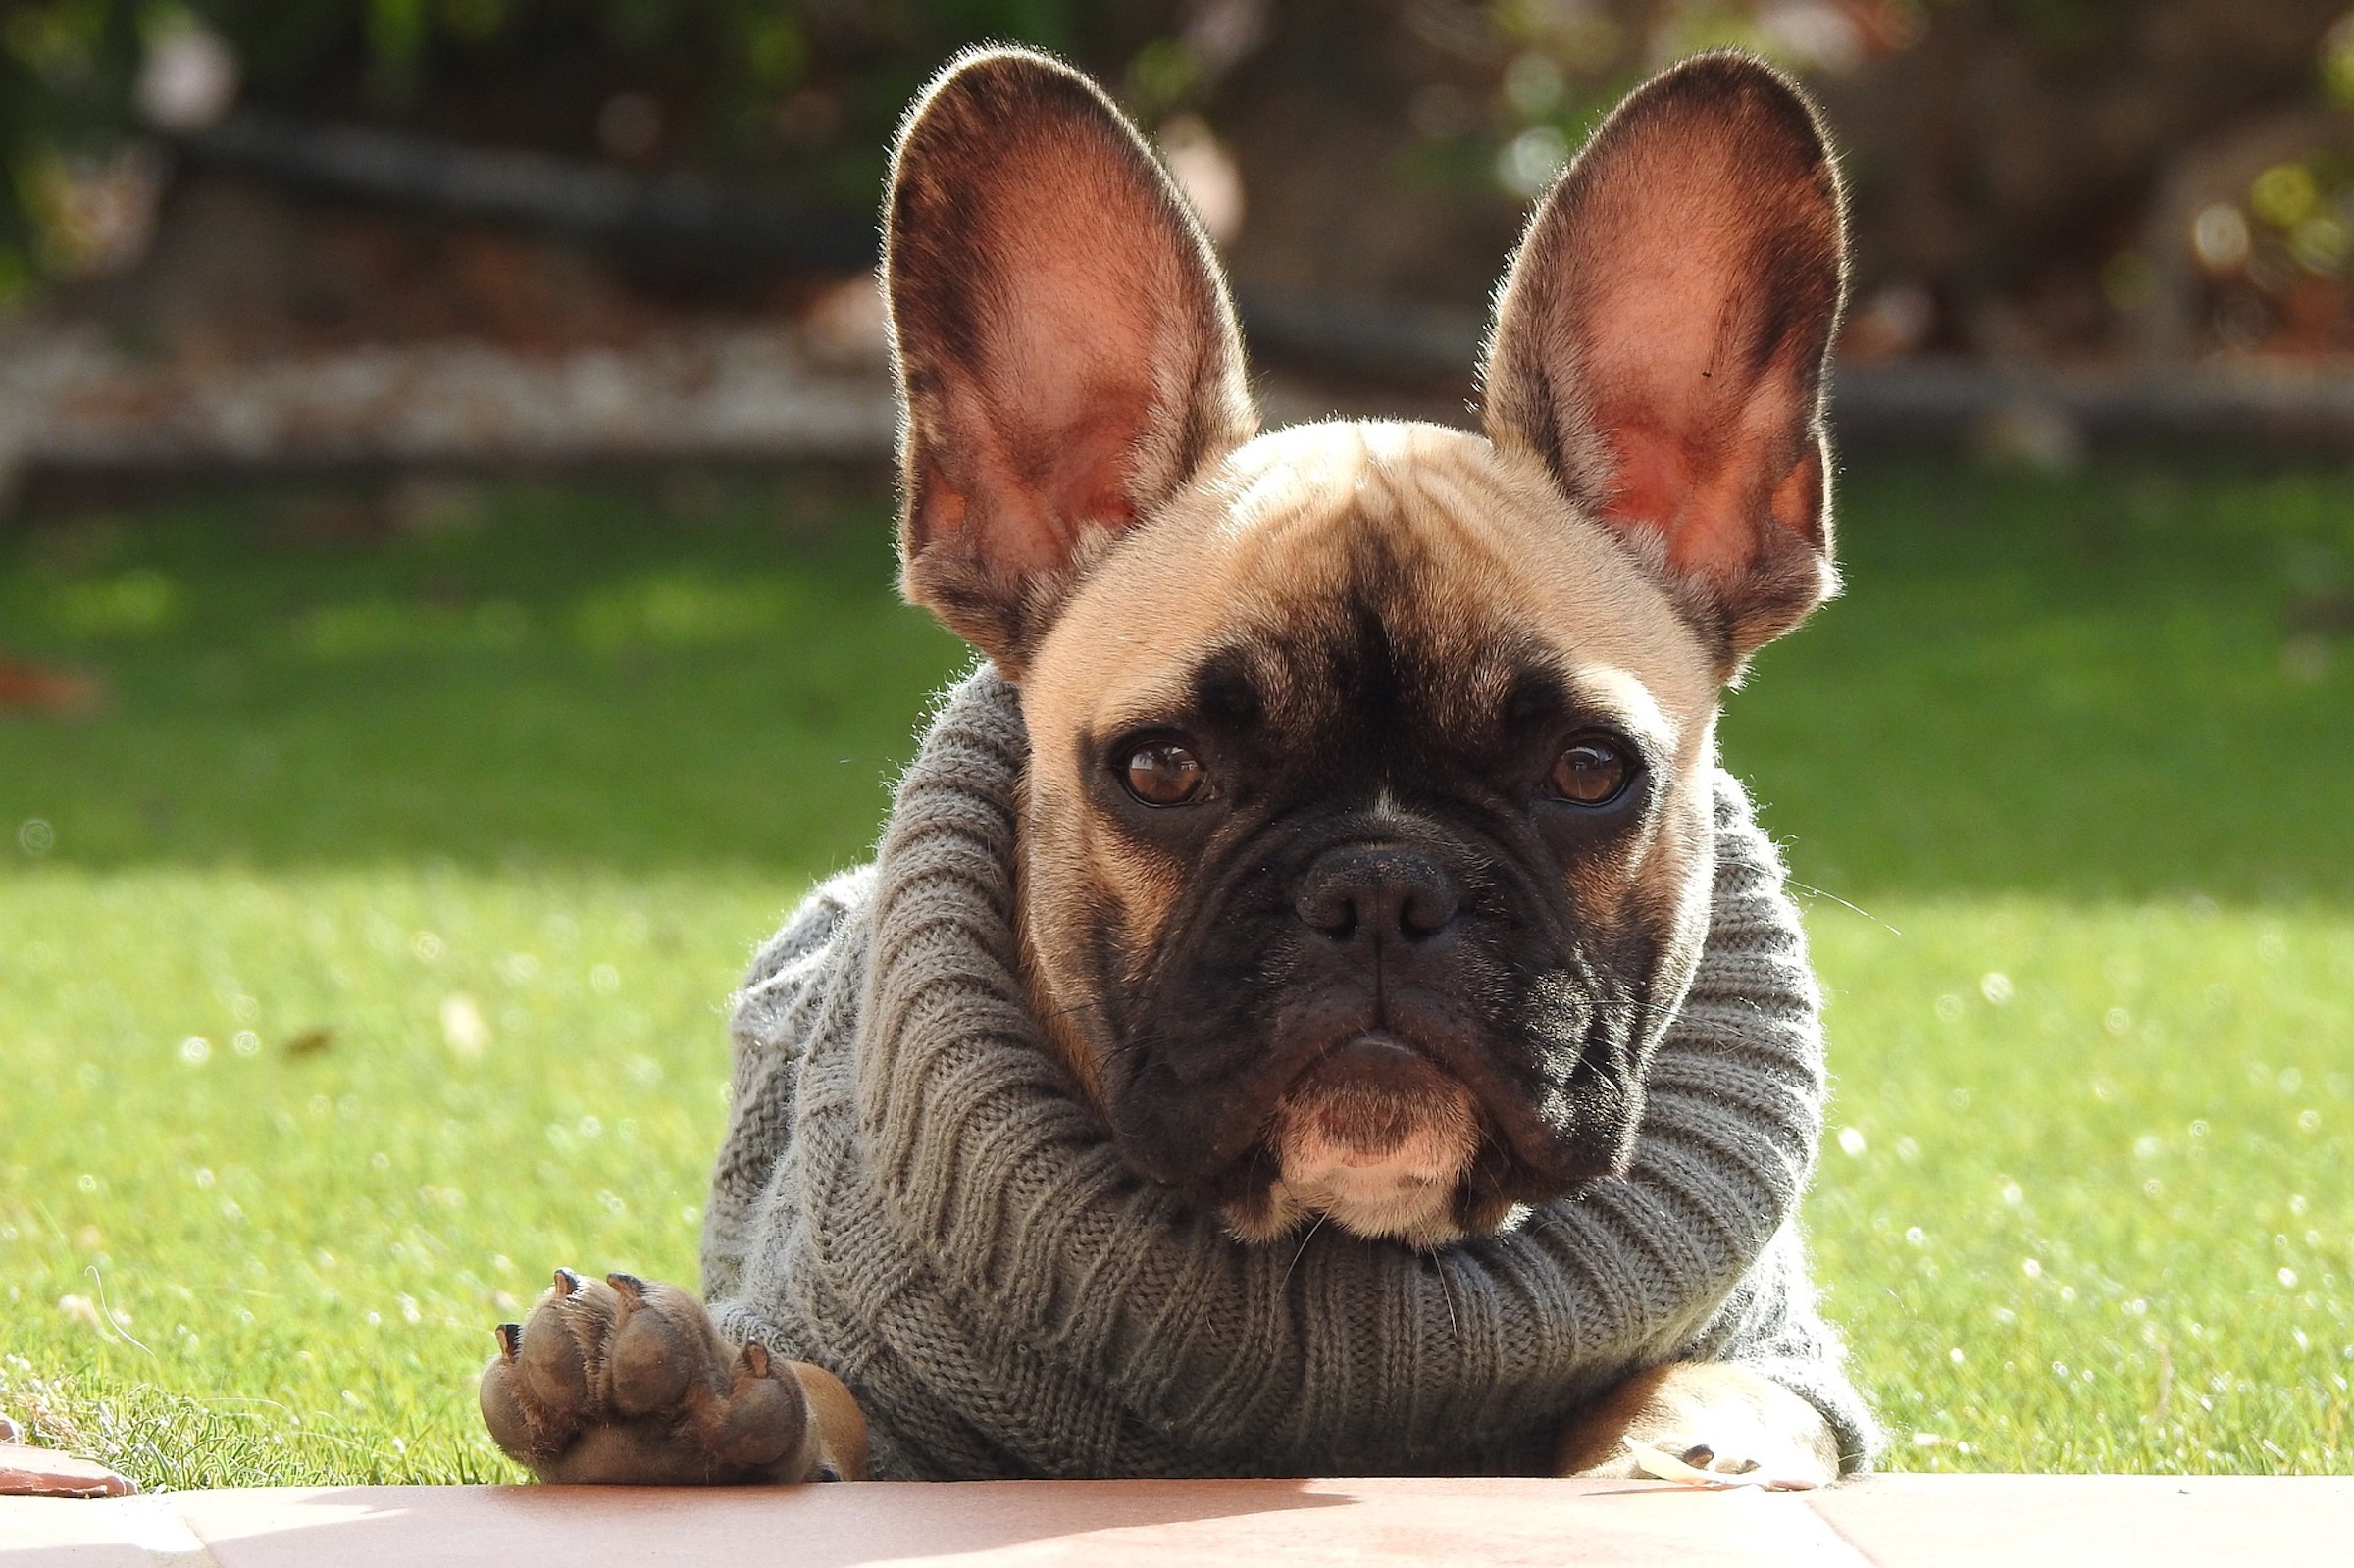 a French bulldog wearing a beige turtleneck sweater puts one hand on a table as they stand in a sunny, grassy outdoor space